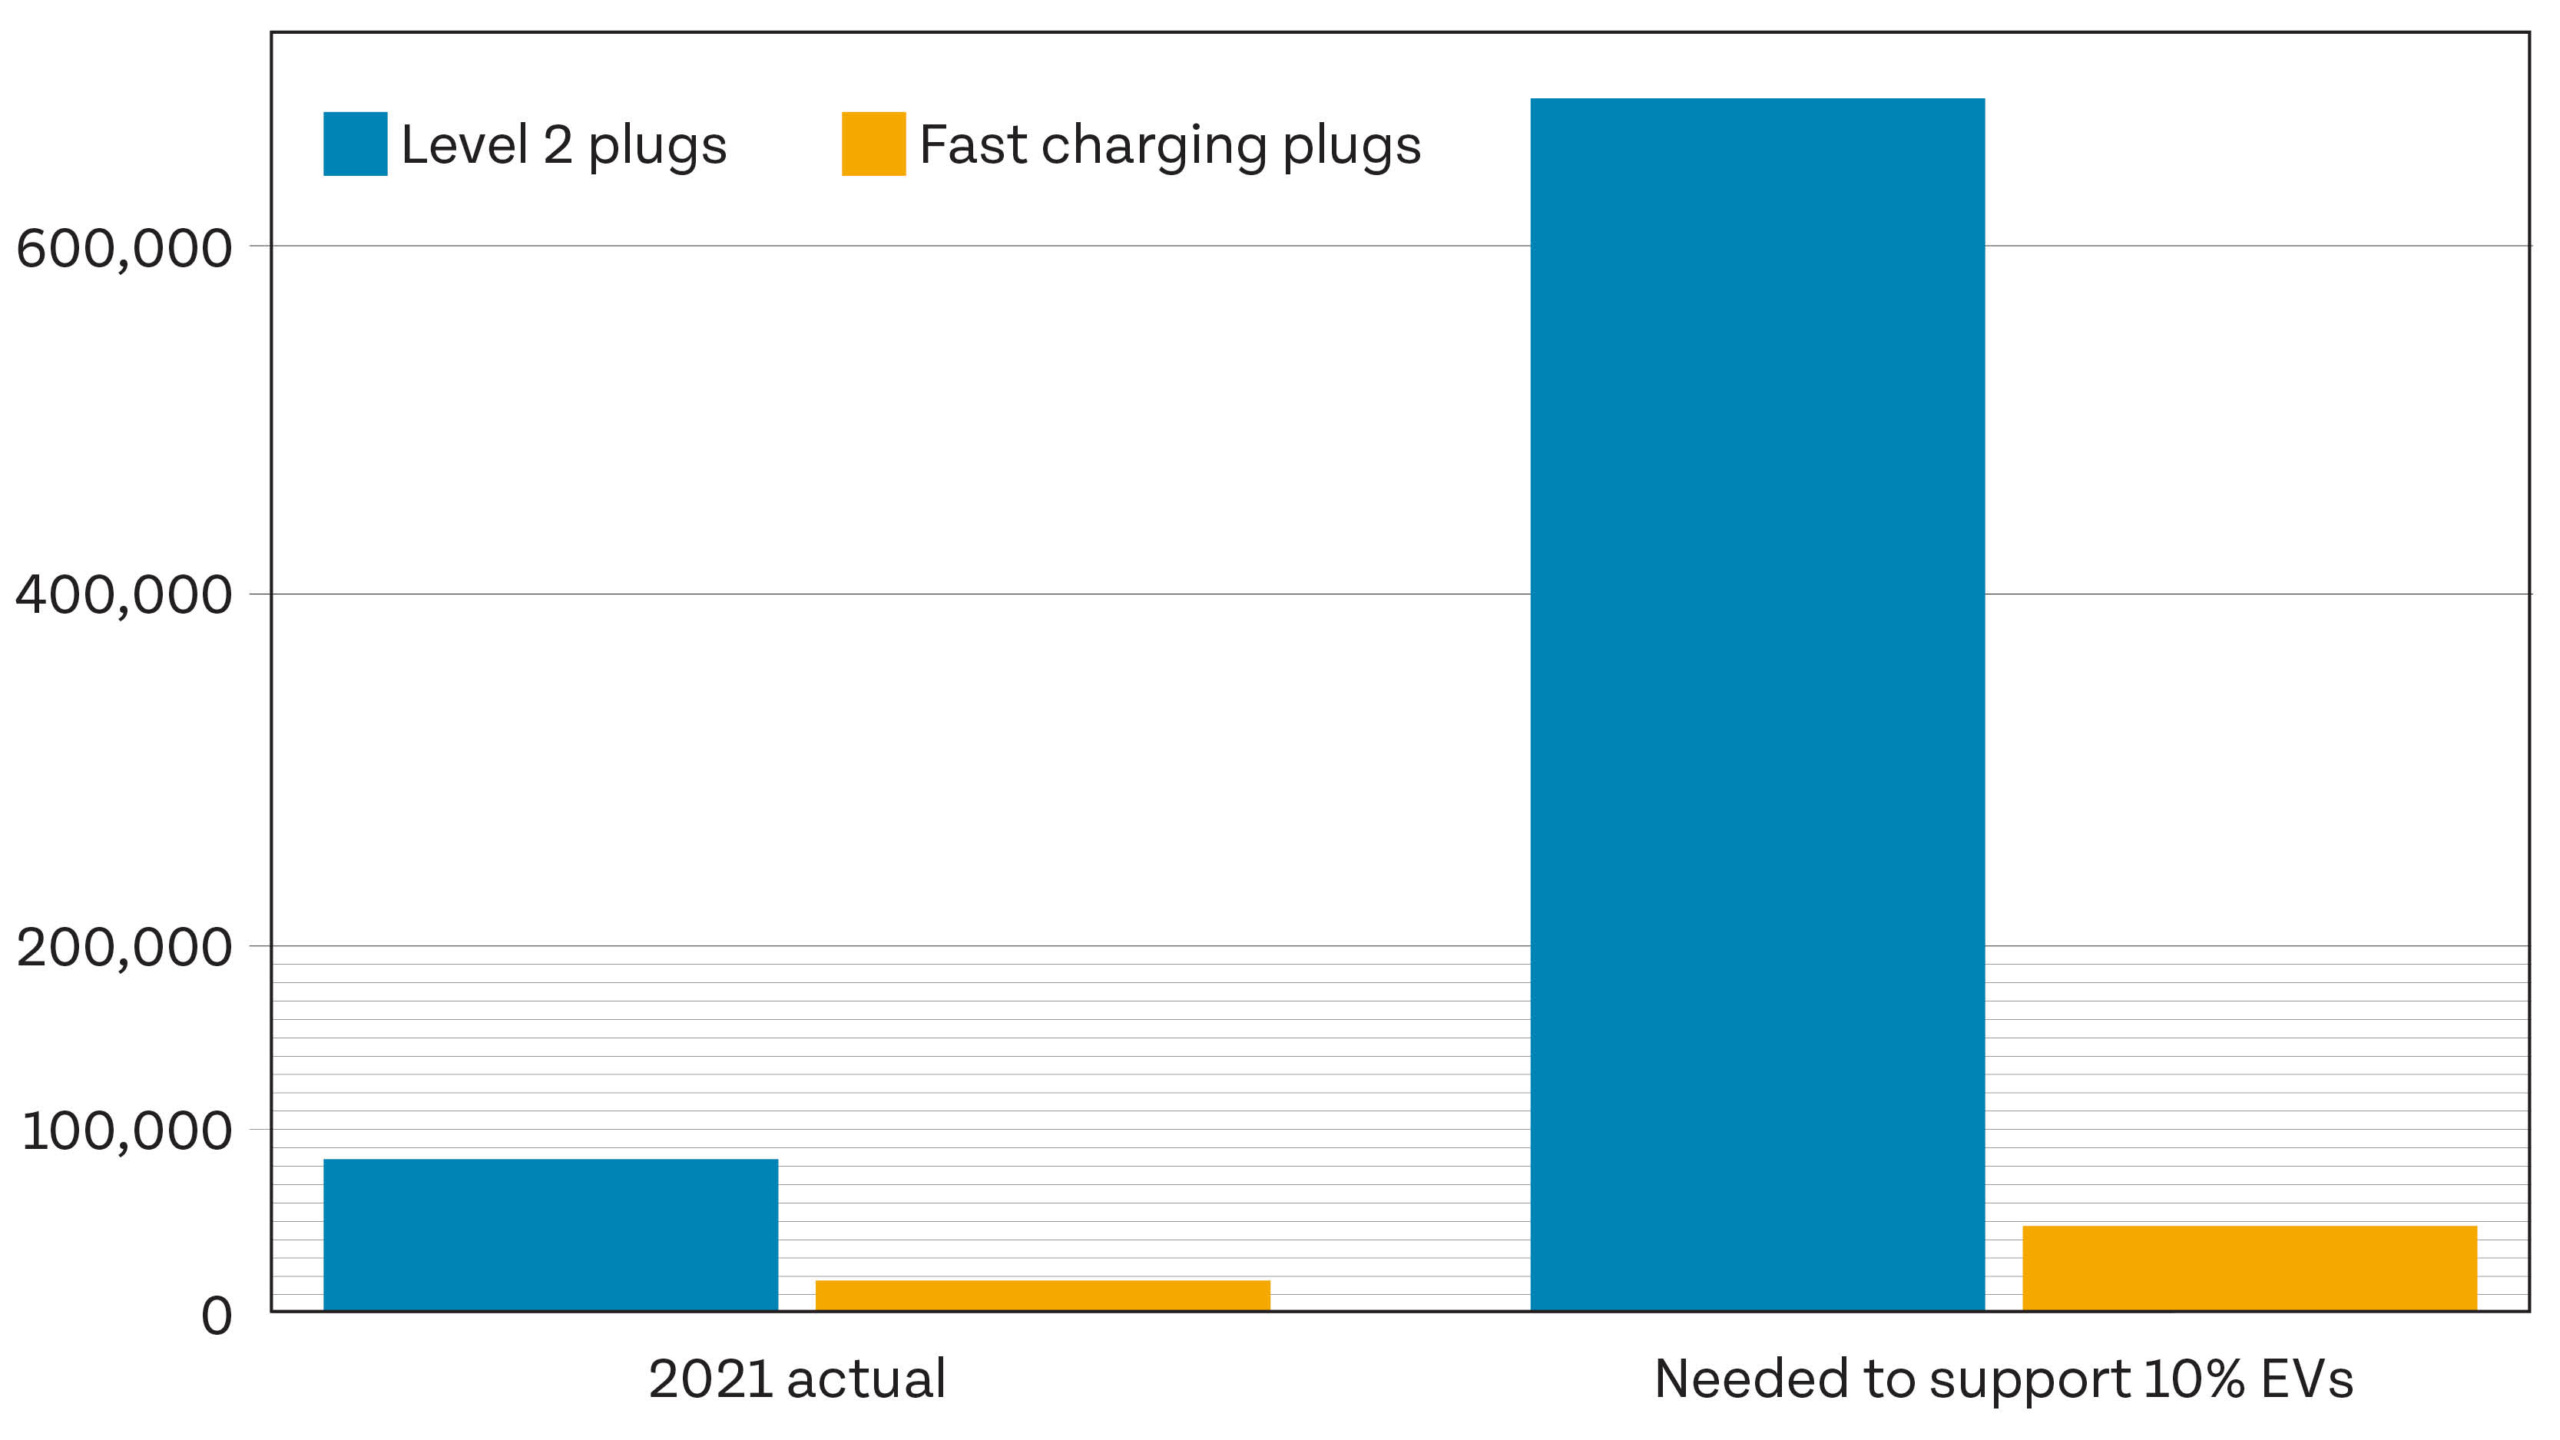 Chart displaying current charging infrastructure versus infrastructure needed to support 10% EVs in 2030